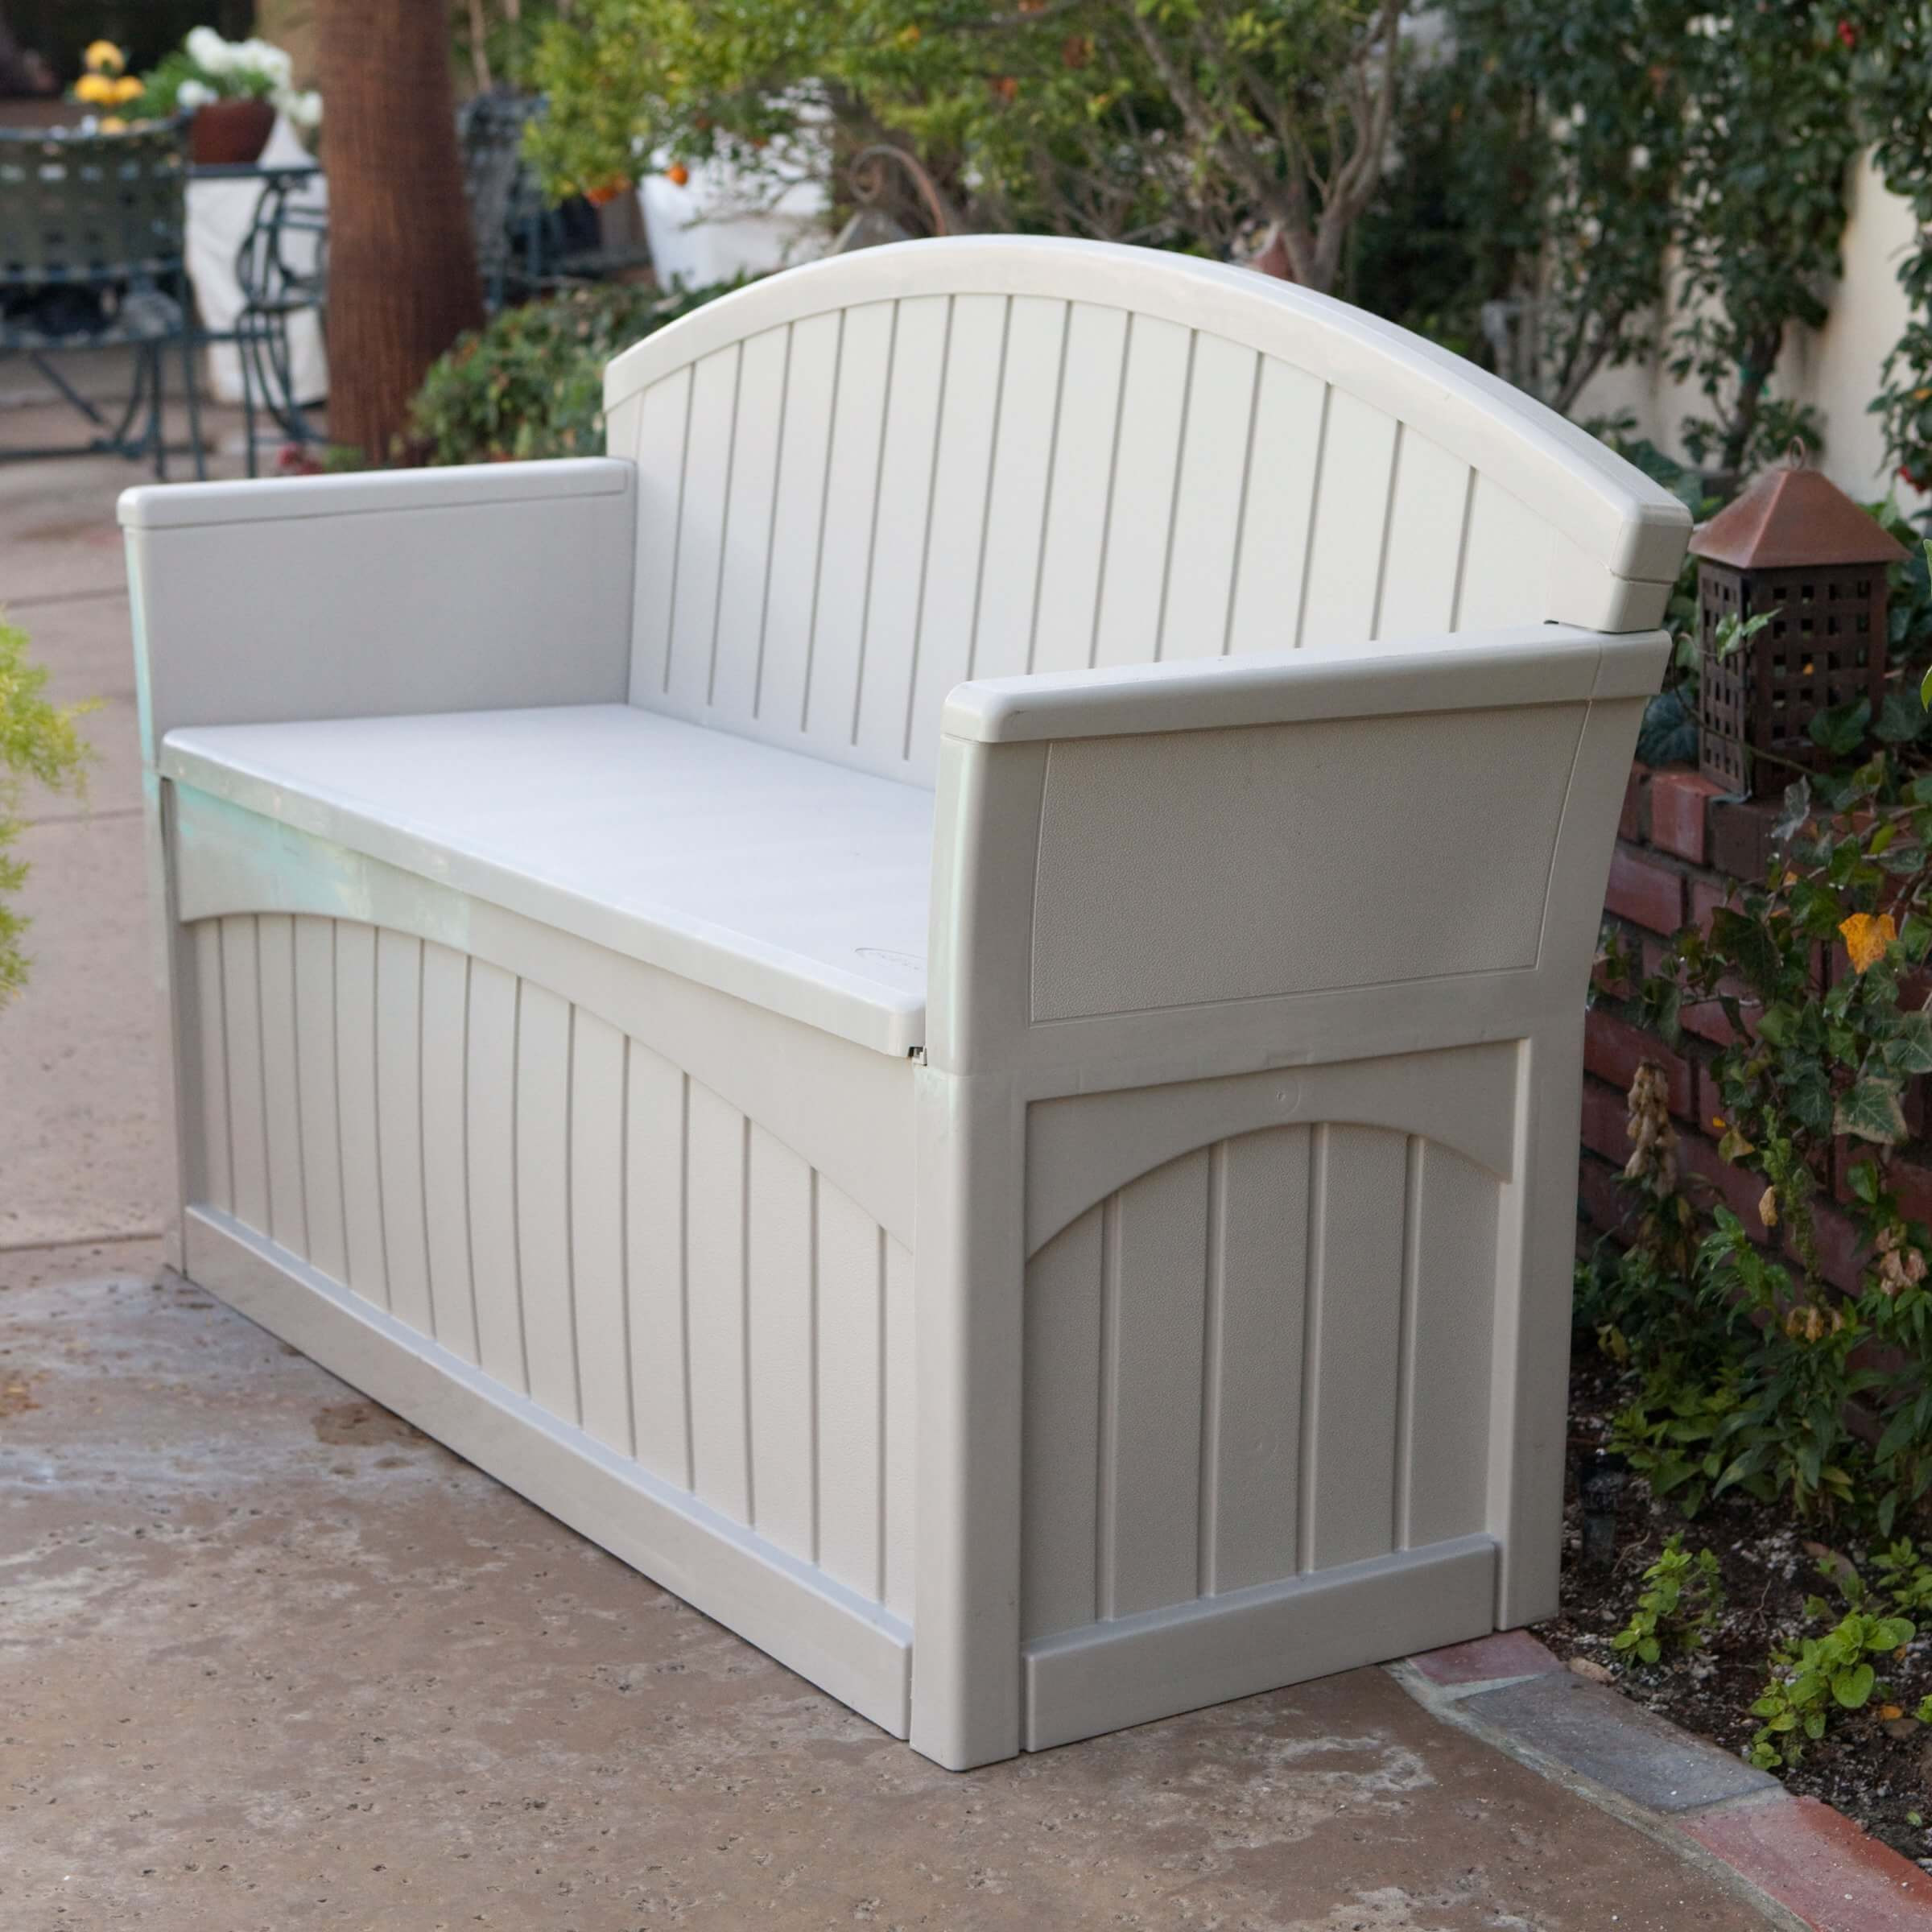 Storage Bench For Deck
 Top 10 Types of Outdoor Deck Storage Boxes